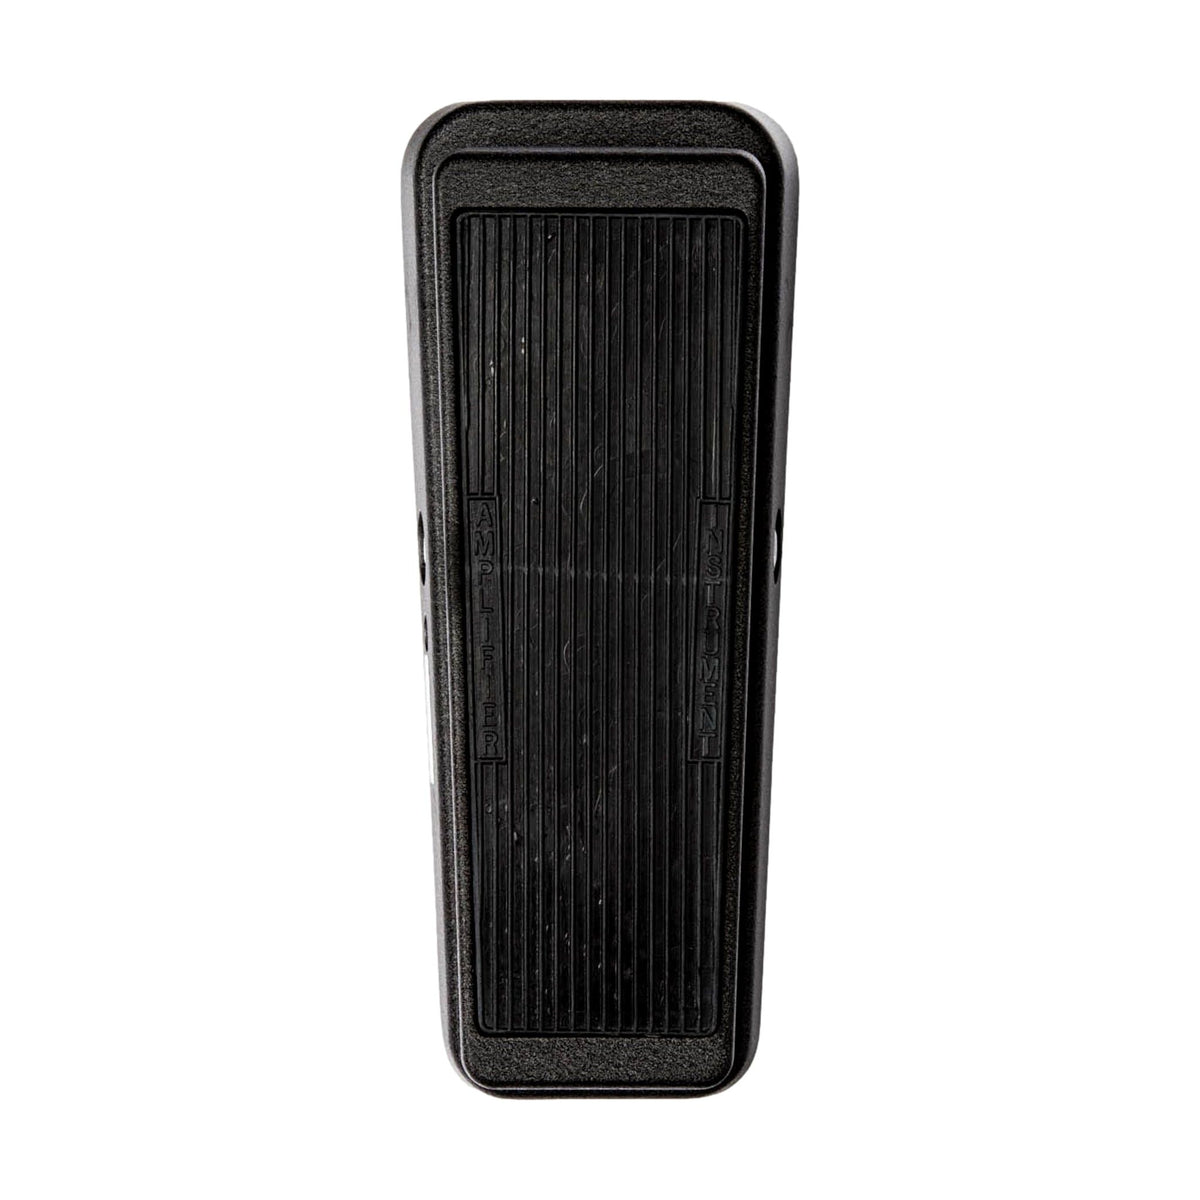 Dunlop Crybaby Wah Wah Effect Pedal